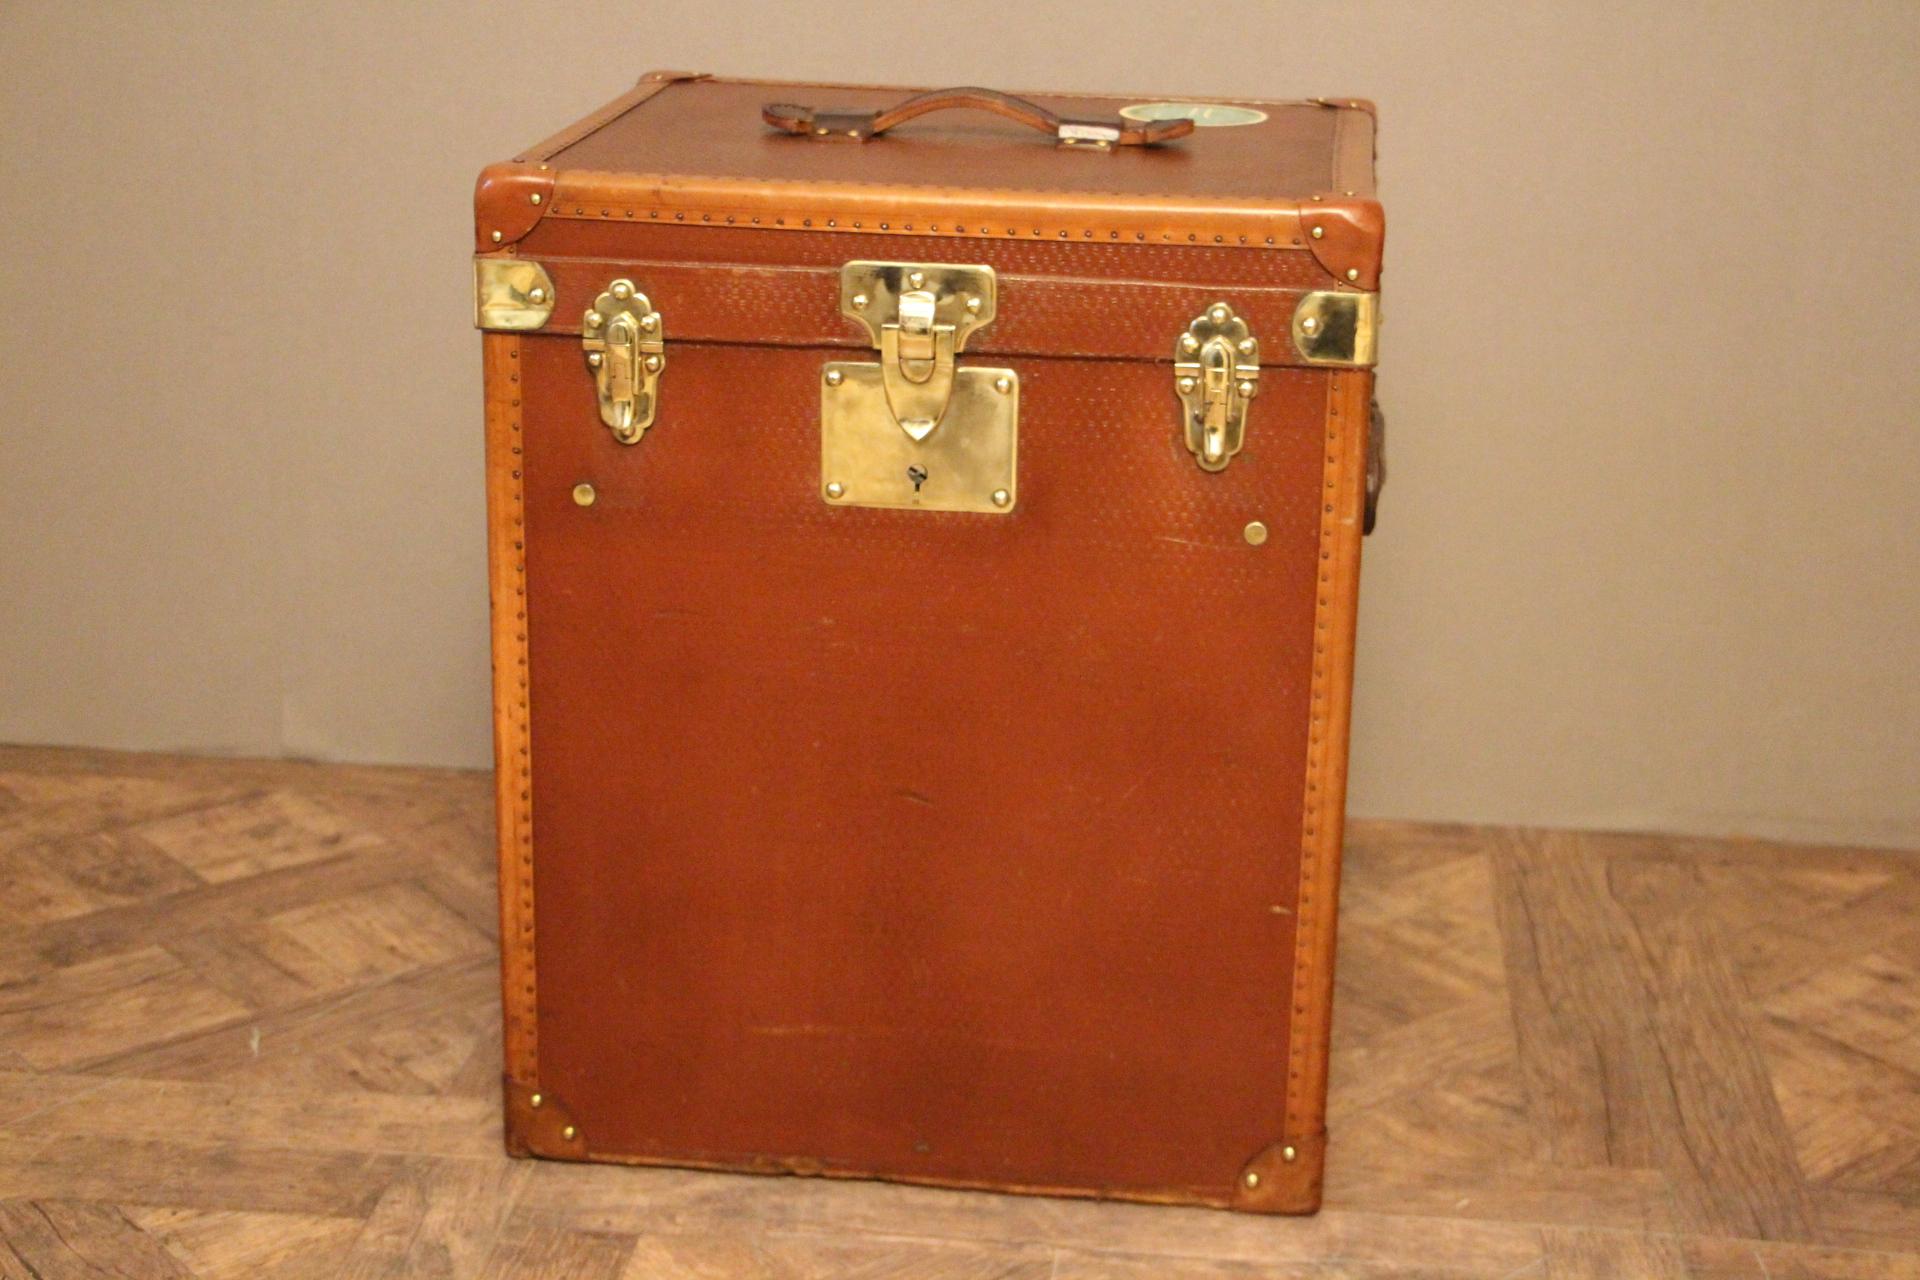 Beautiful tall hat box with solid brass locks and leather handles on each side as well as on the top. A couple of traveling labels.
It is an unusual shape because it is tall.
Original inside with its removable tray. Only the interior of the lid